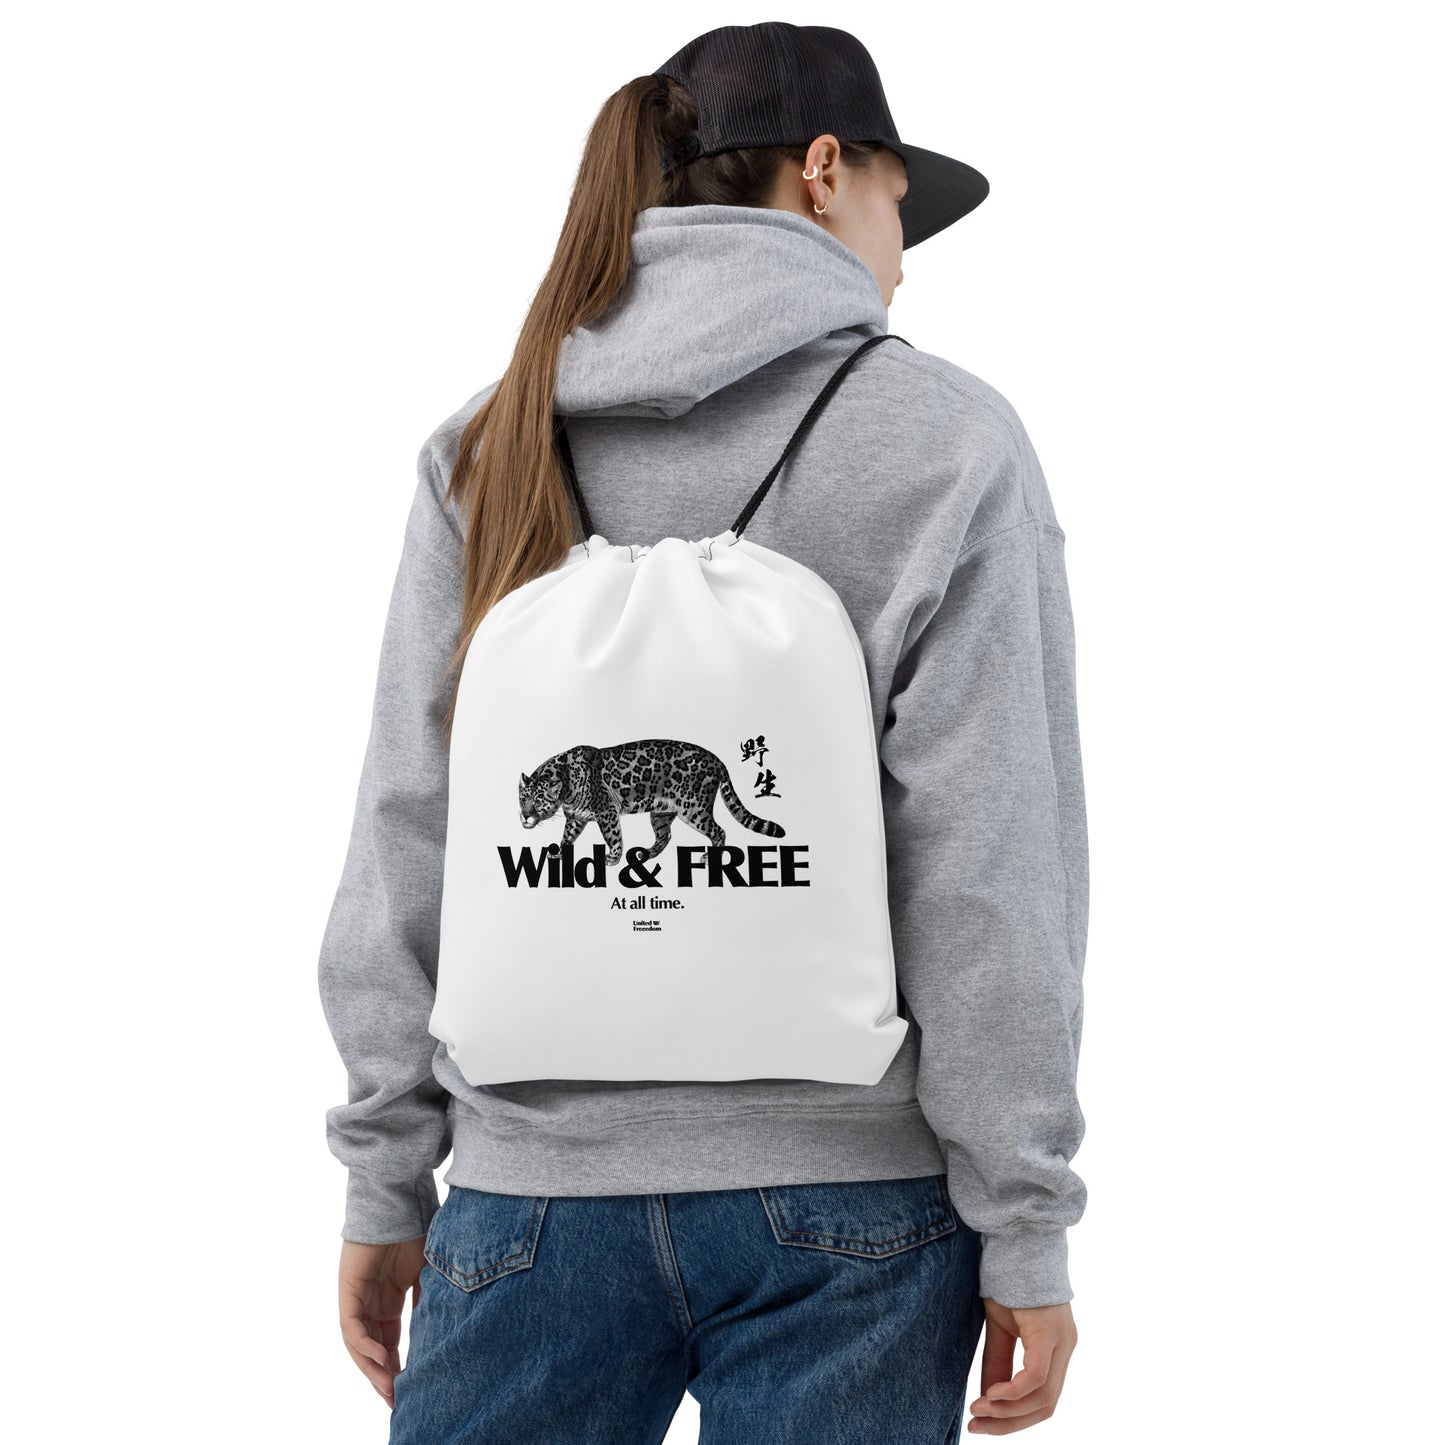 Wild & Free<br>Panther Back Pouch 野生